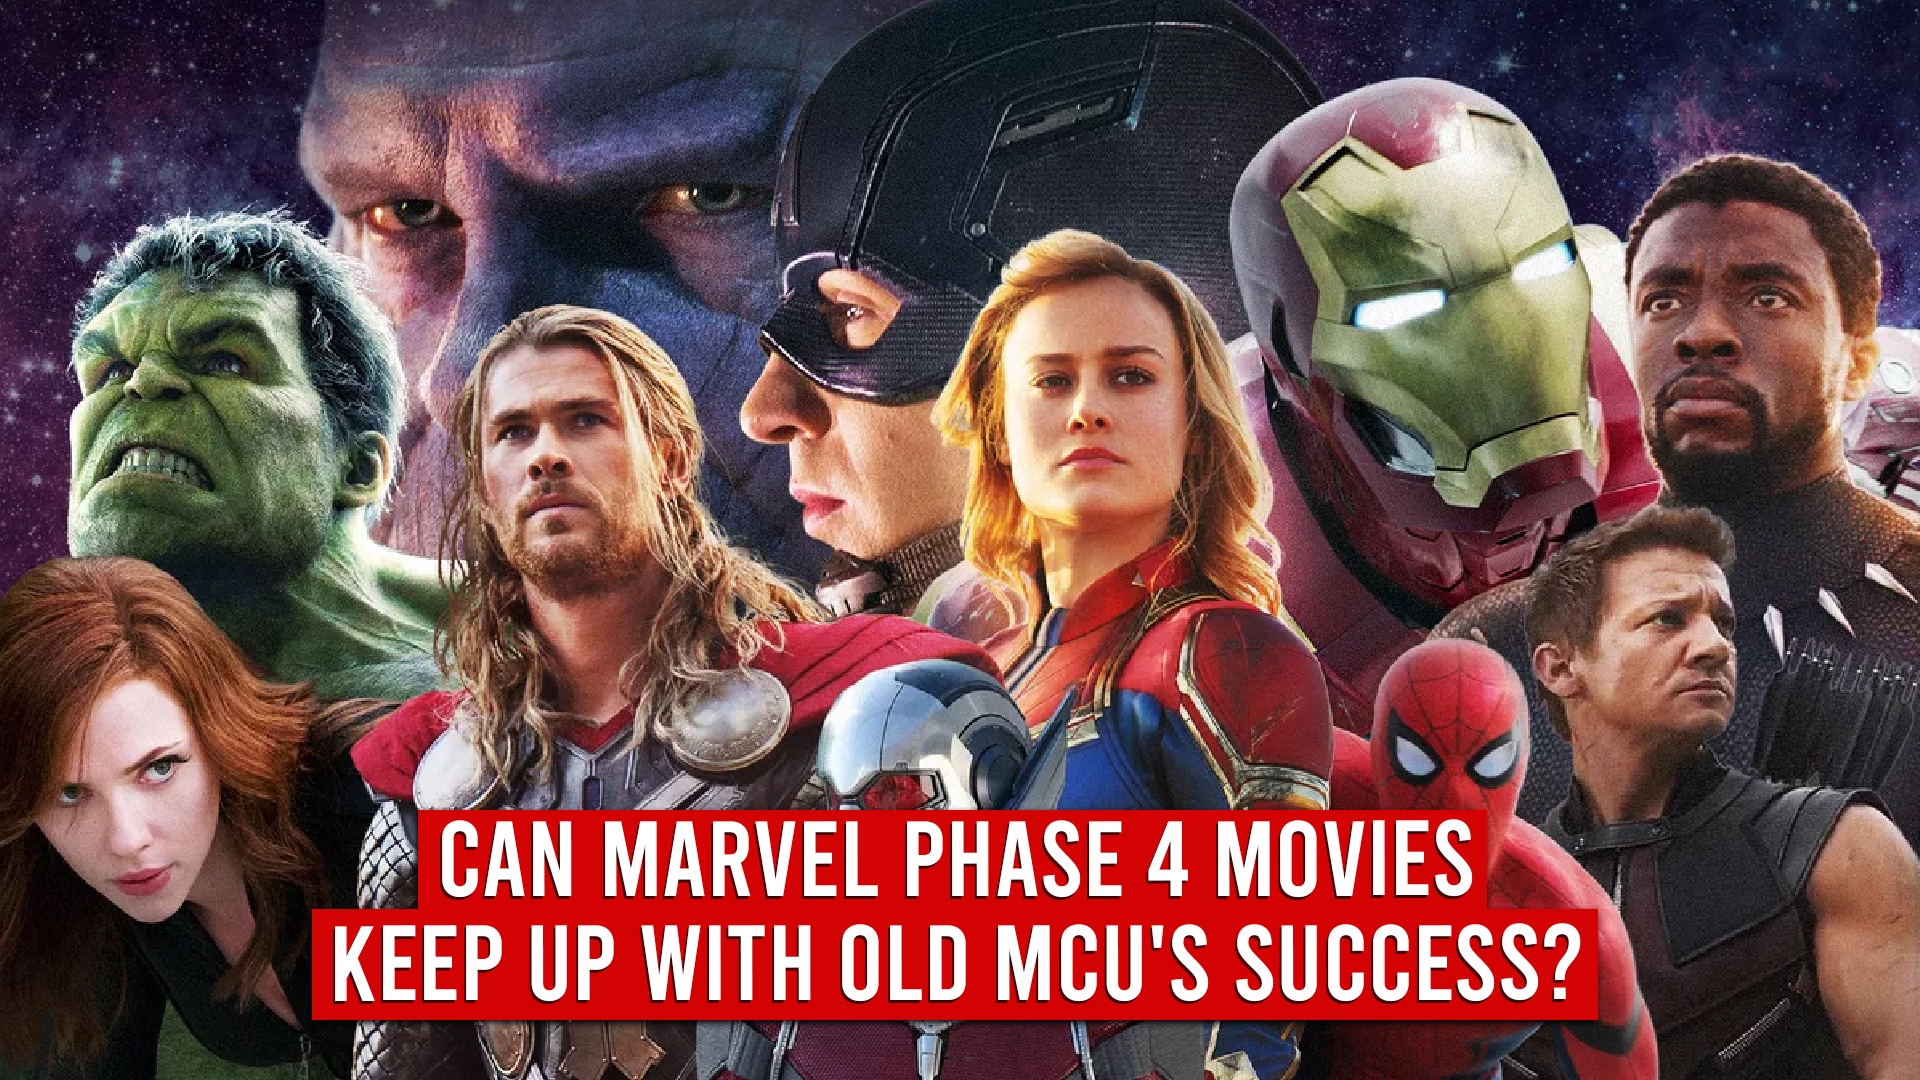 Can Marvel Phase 4 Movies Keep Up With Old MCU’s Success?